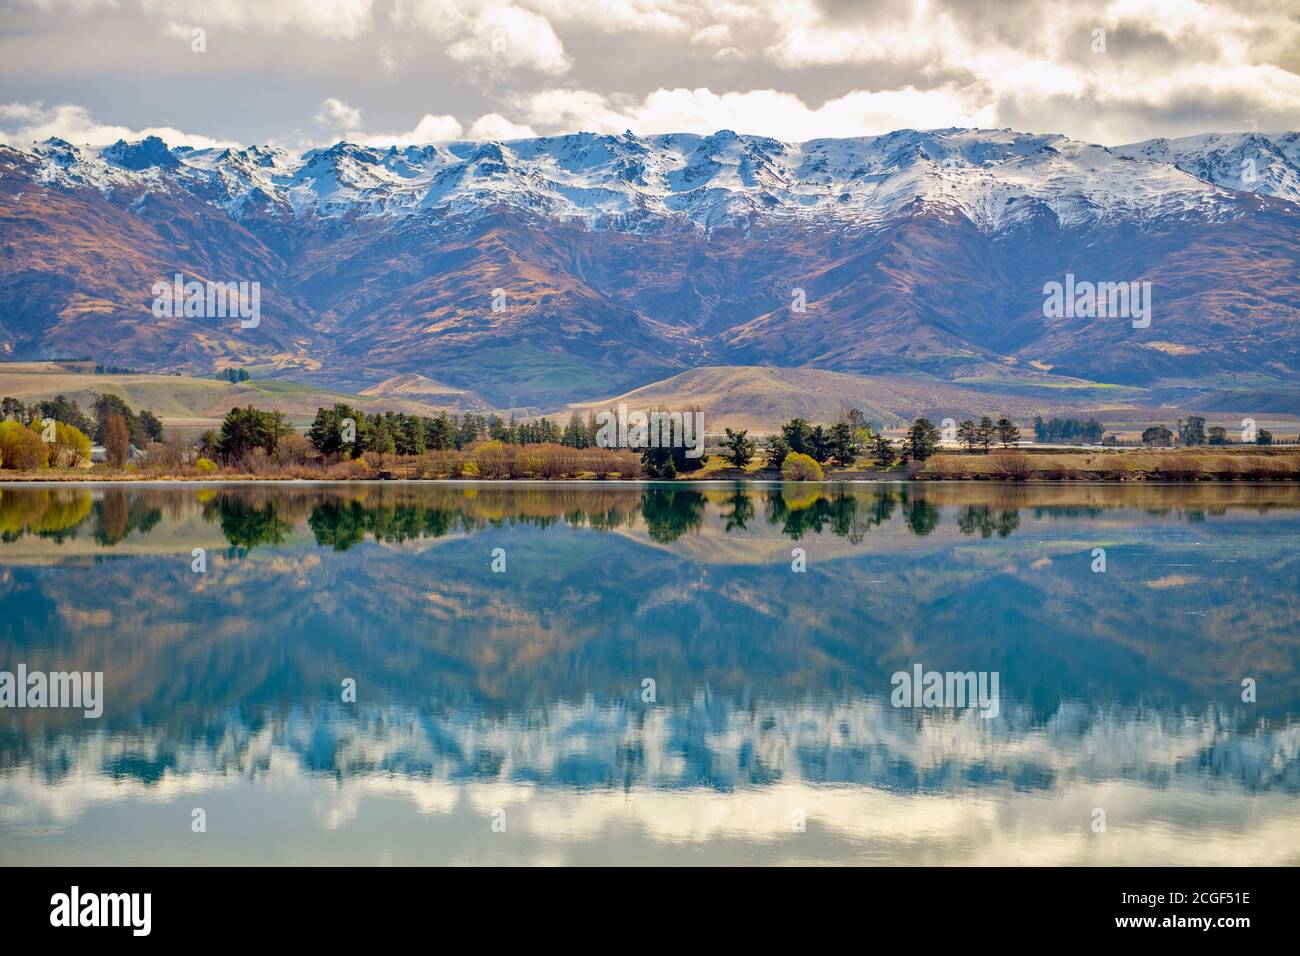 Mountains and trees are beautiful scenery. It reflects water like a mirror at Quartz Reef Point Historic Reserve, New Zealand. Stock Photo